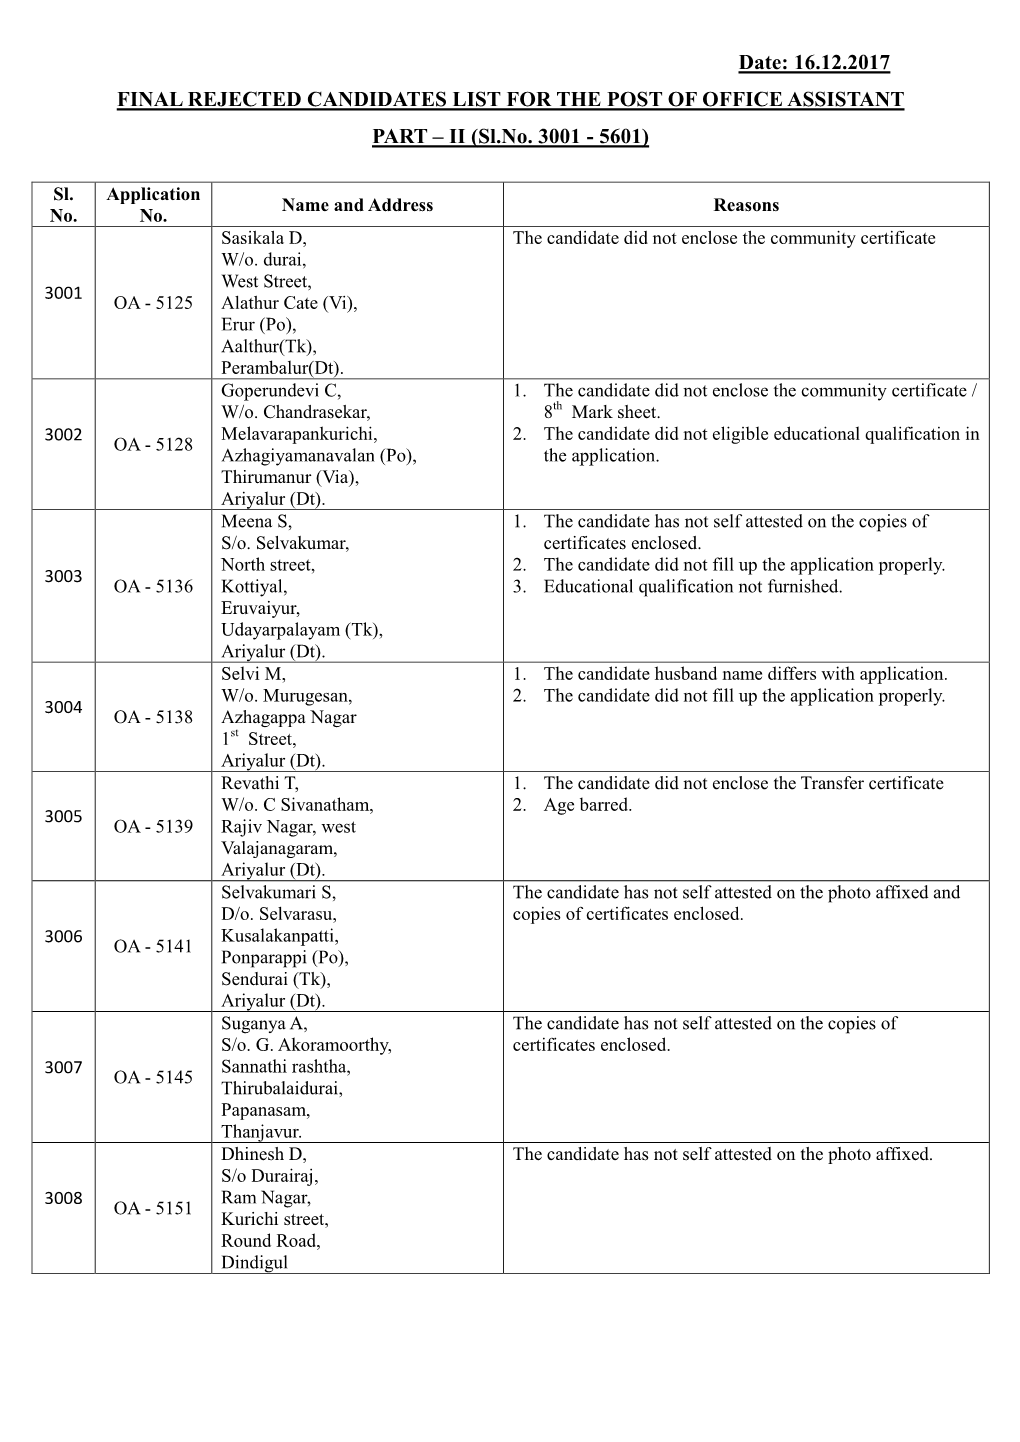 Date: 16.12.2017 FINAL REJECTED CANDIDATES LIST for the POST of OFFICE ASSISTANT PART – II (Sl.No